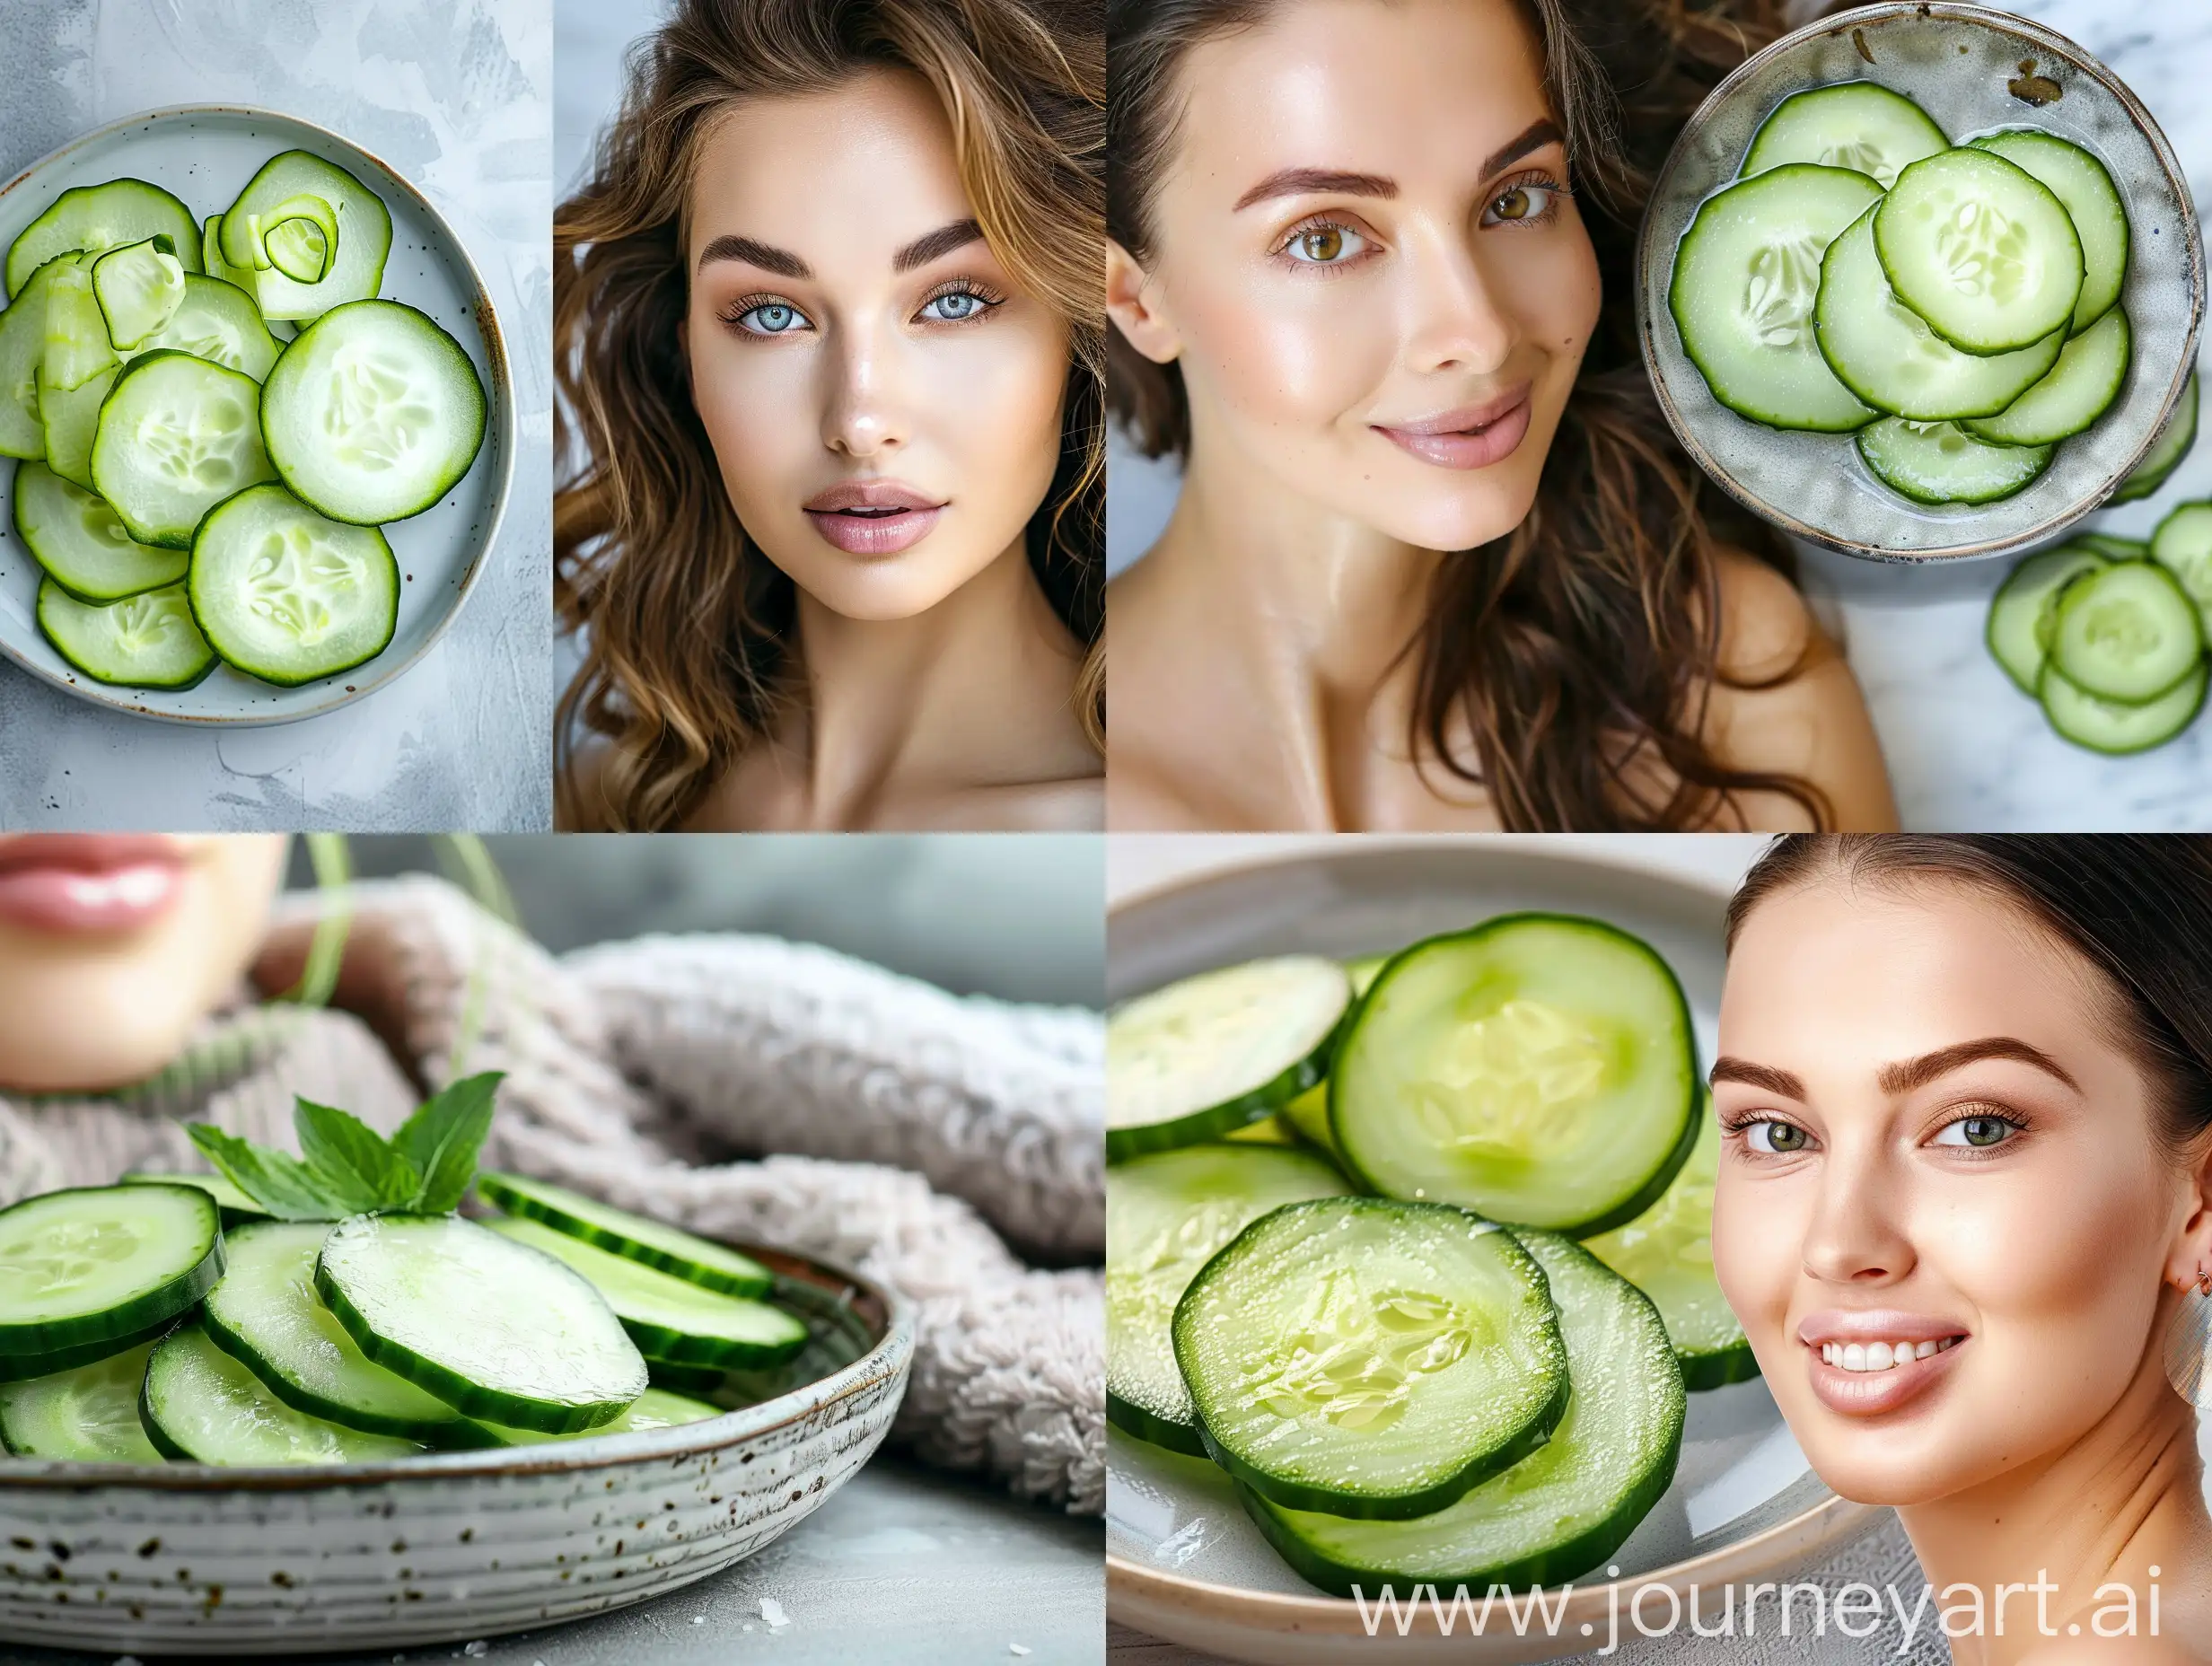 Natural and real photo of a beautiful woman. A few slices of cucumber on a plate